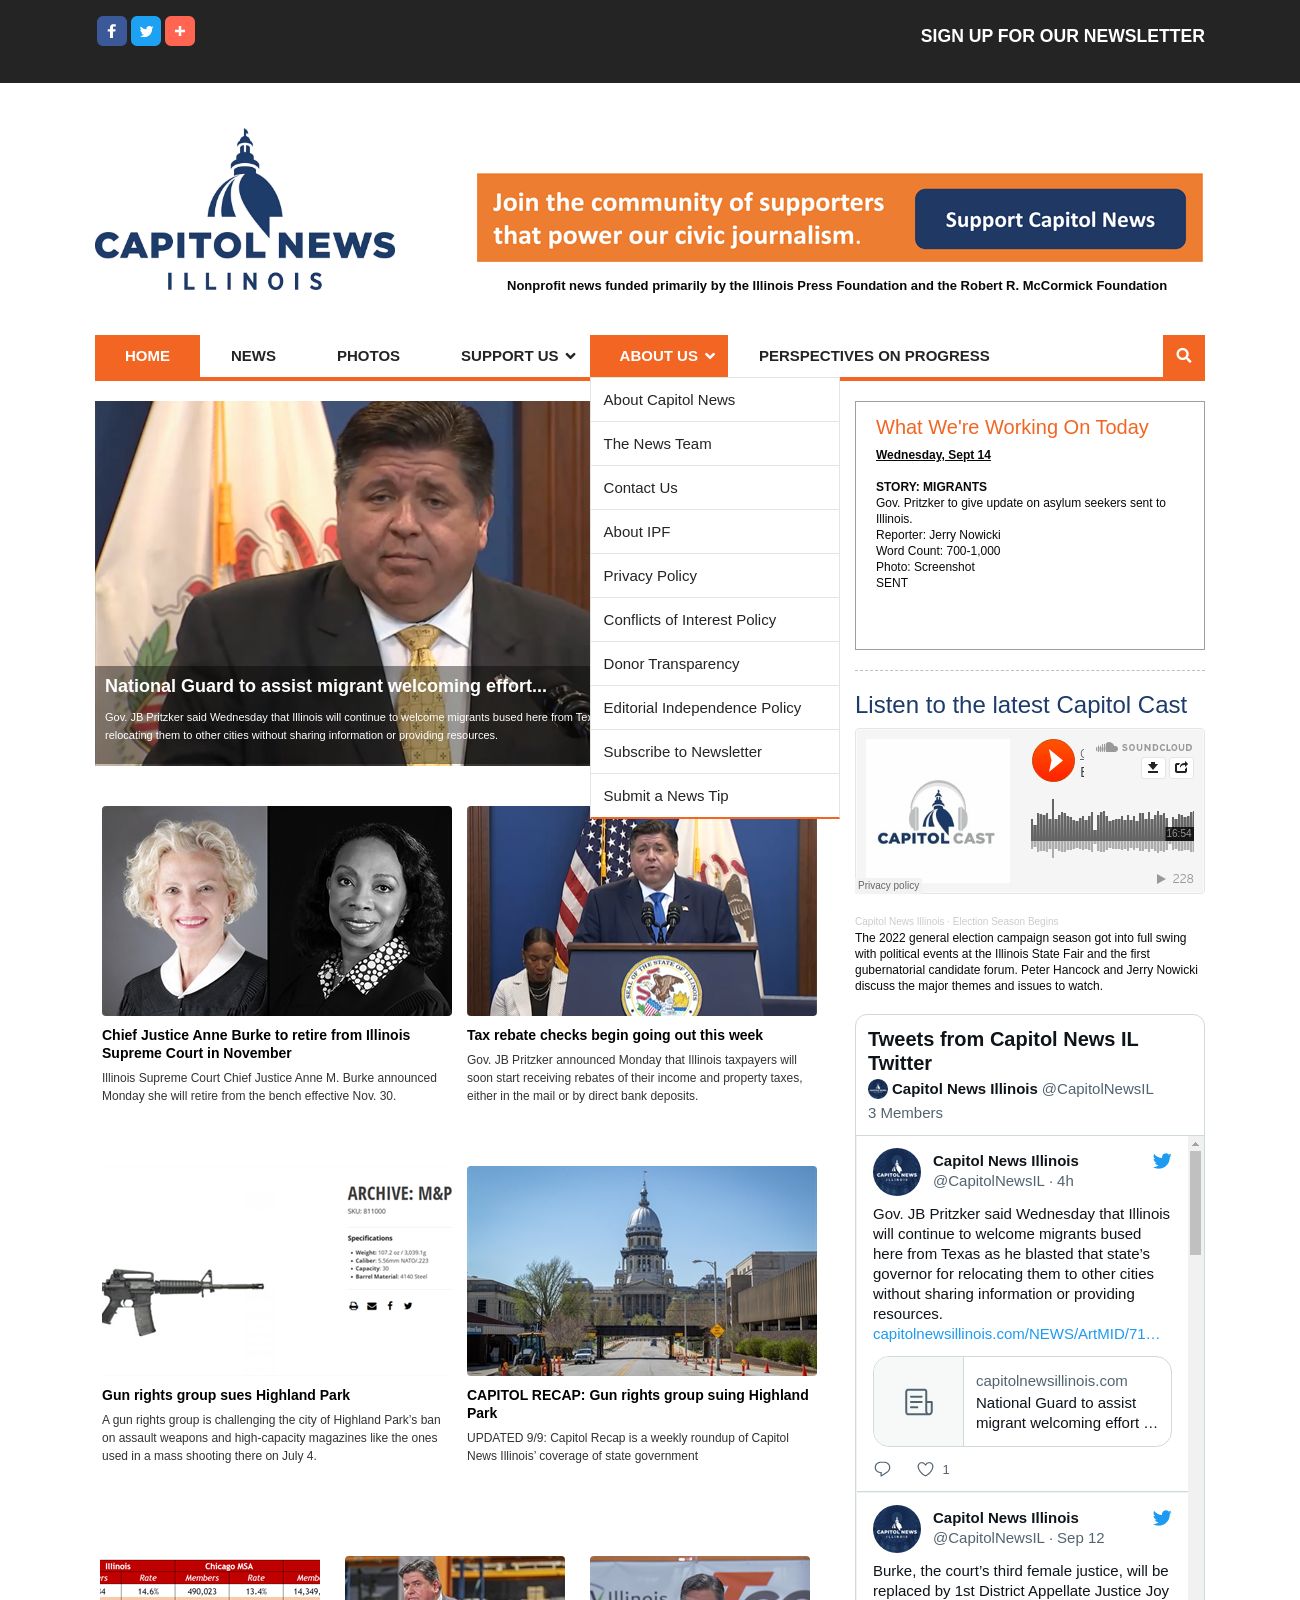 Capitol News Illinois at 2022-09-14 18:03:38-05:00 local time